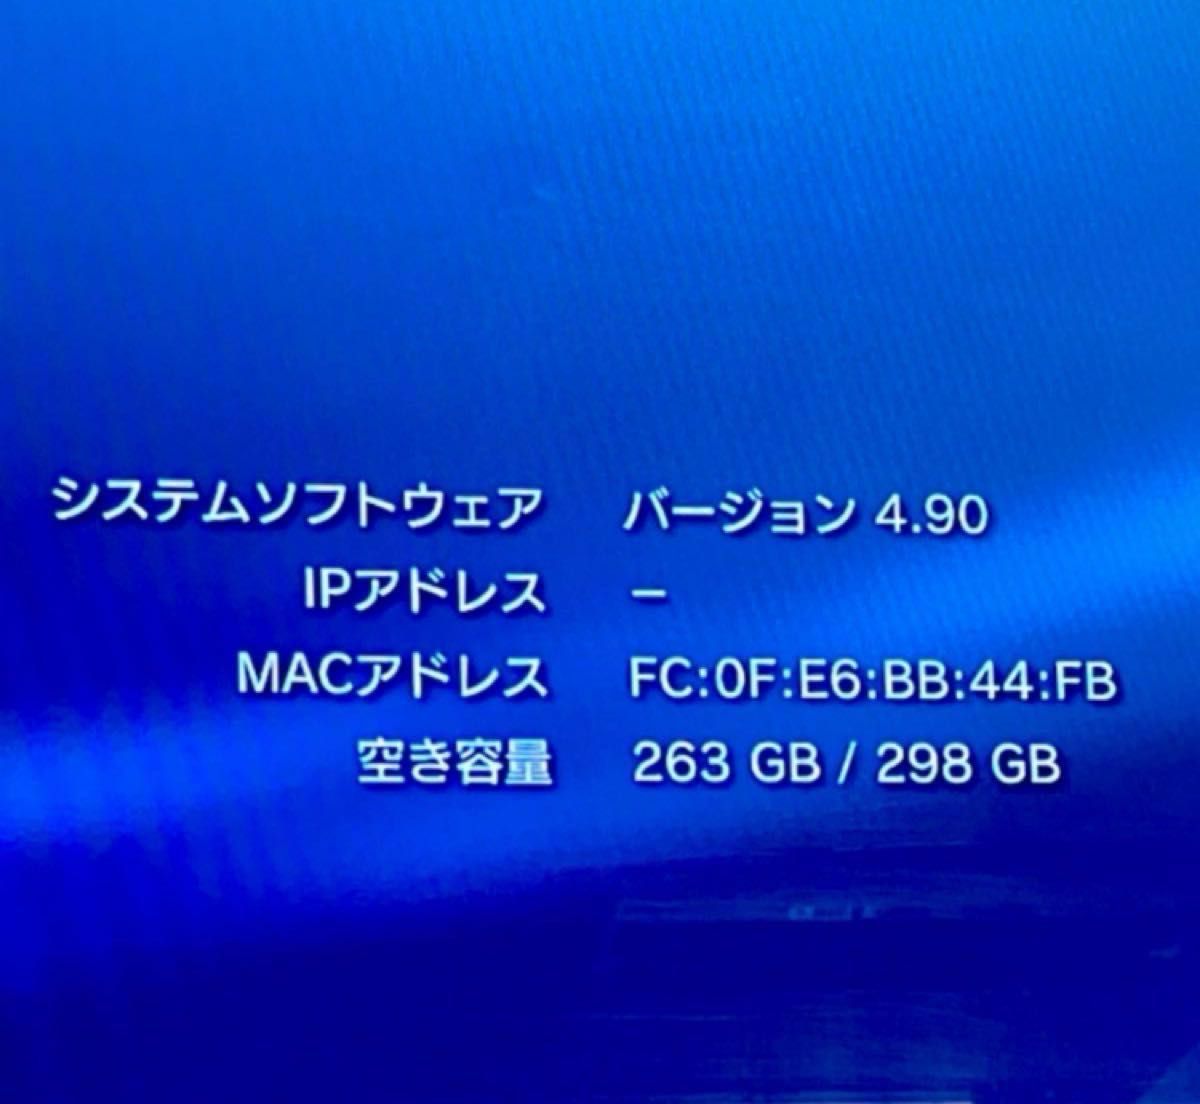 SONY PlayStation3 HDDレコーダーパックCEJH-10017 PS3ソフト8作品付き